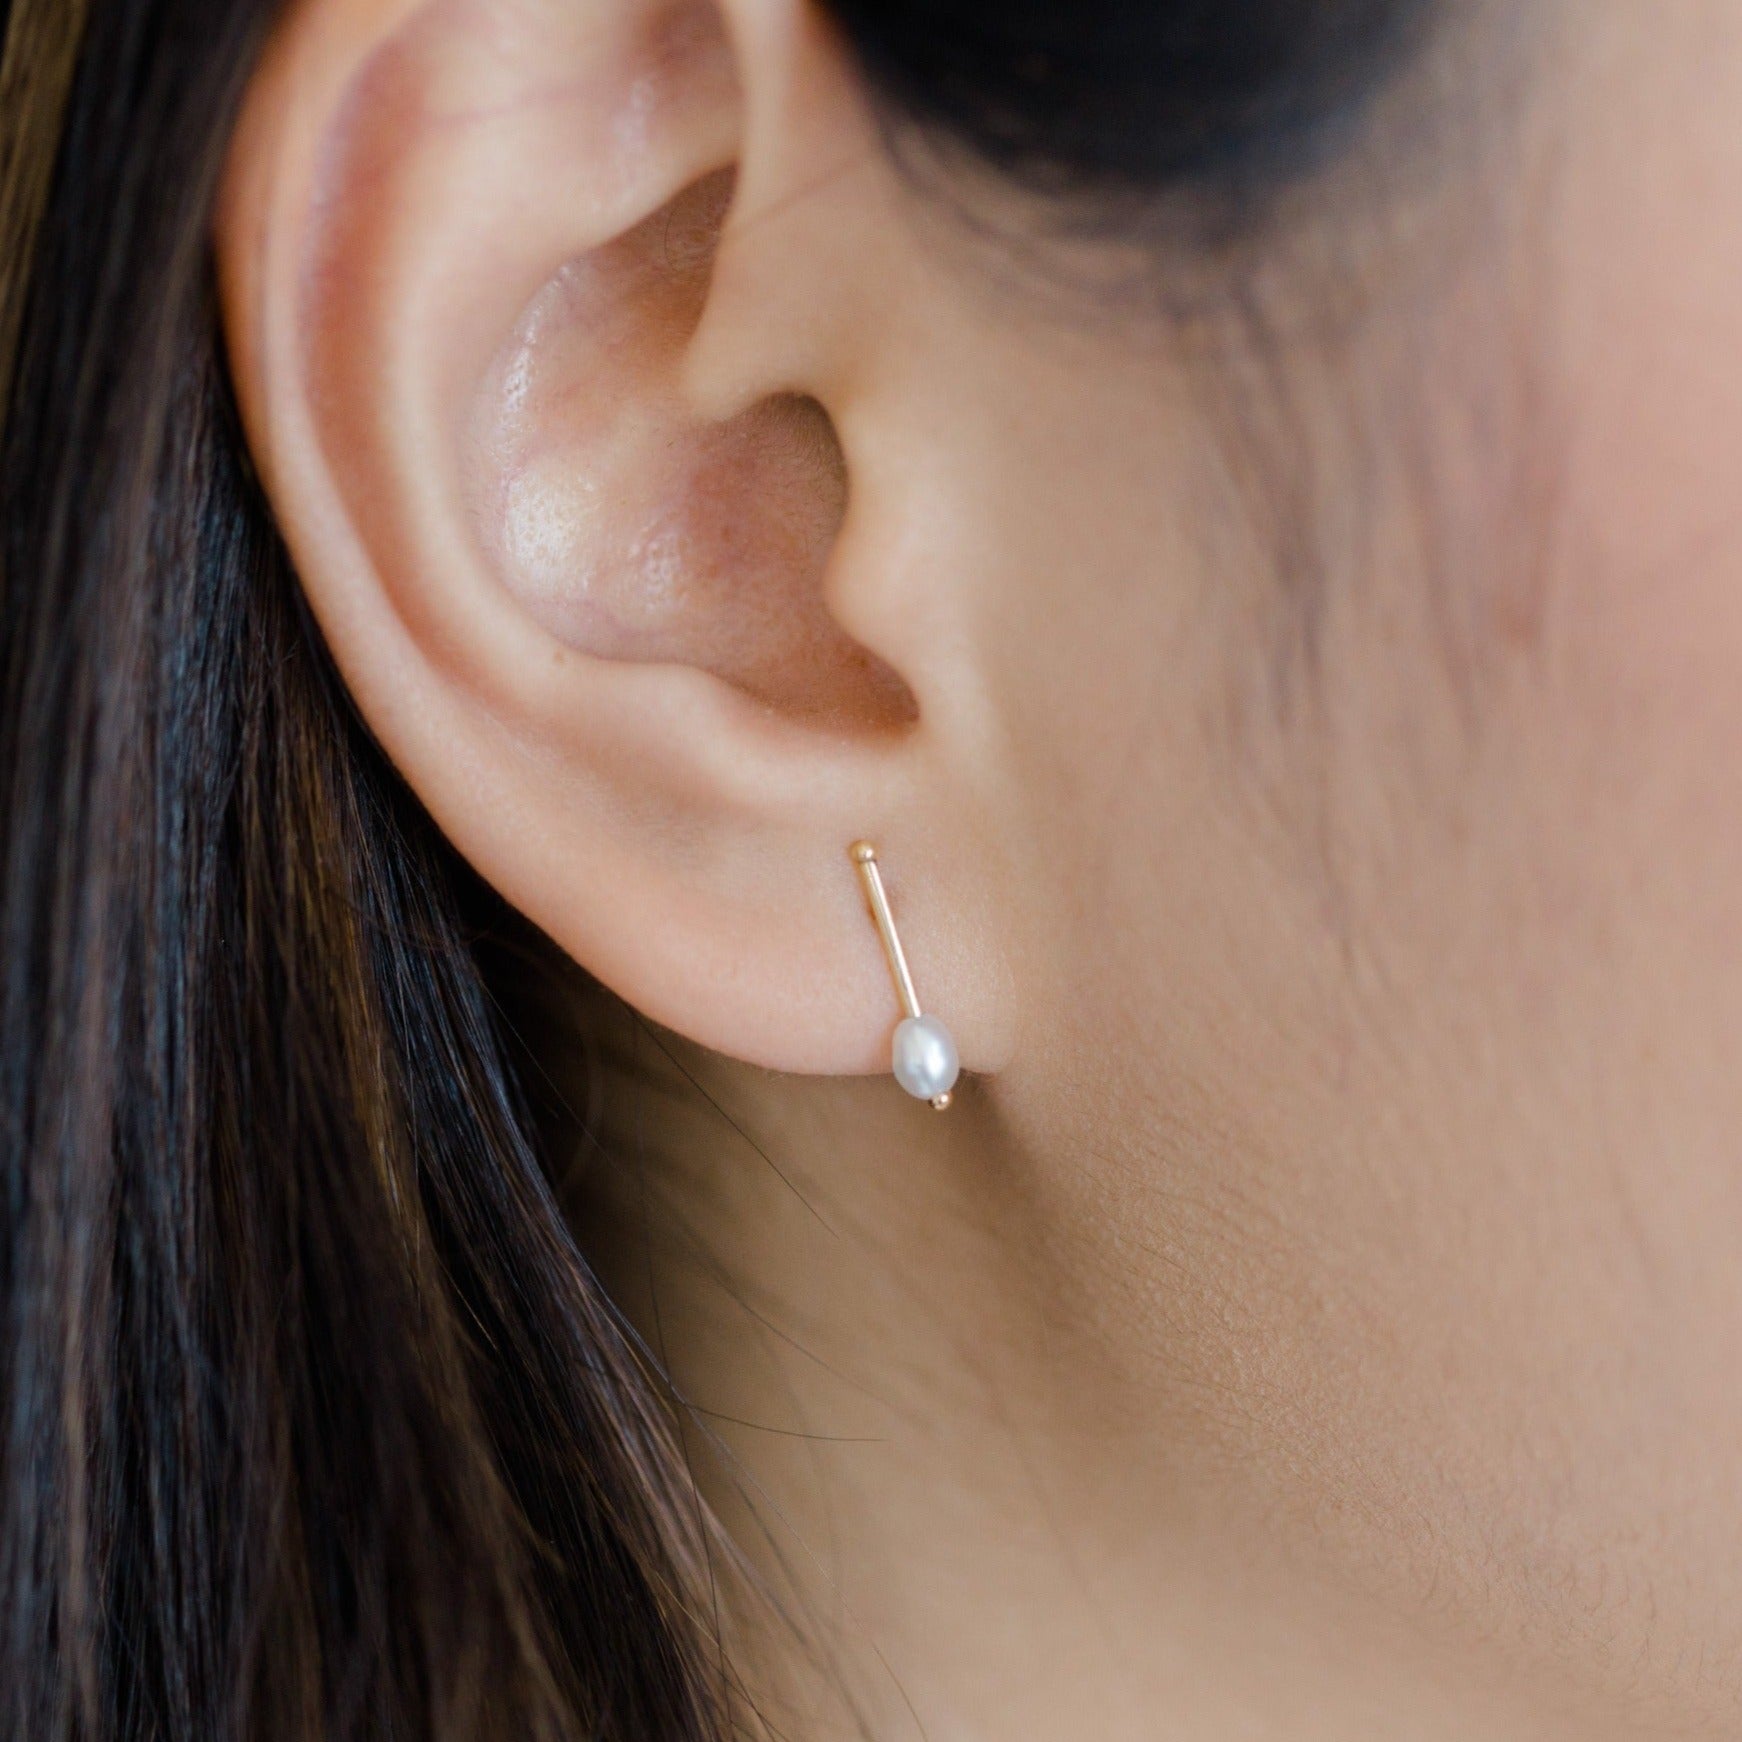 Delicate gold bar earring with a tiny white pearl. Handcrafted earring made with recycled 14k gold and natural pearl gemstone. Light and great for everyday wear.